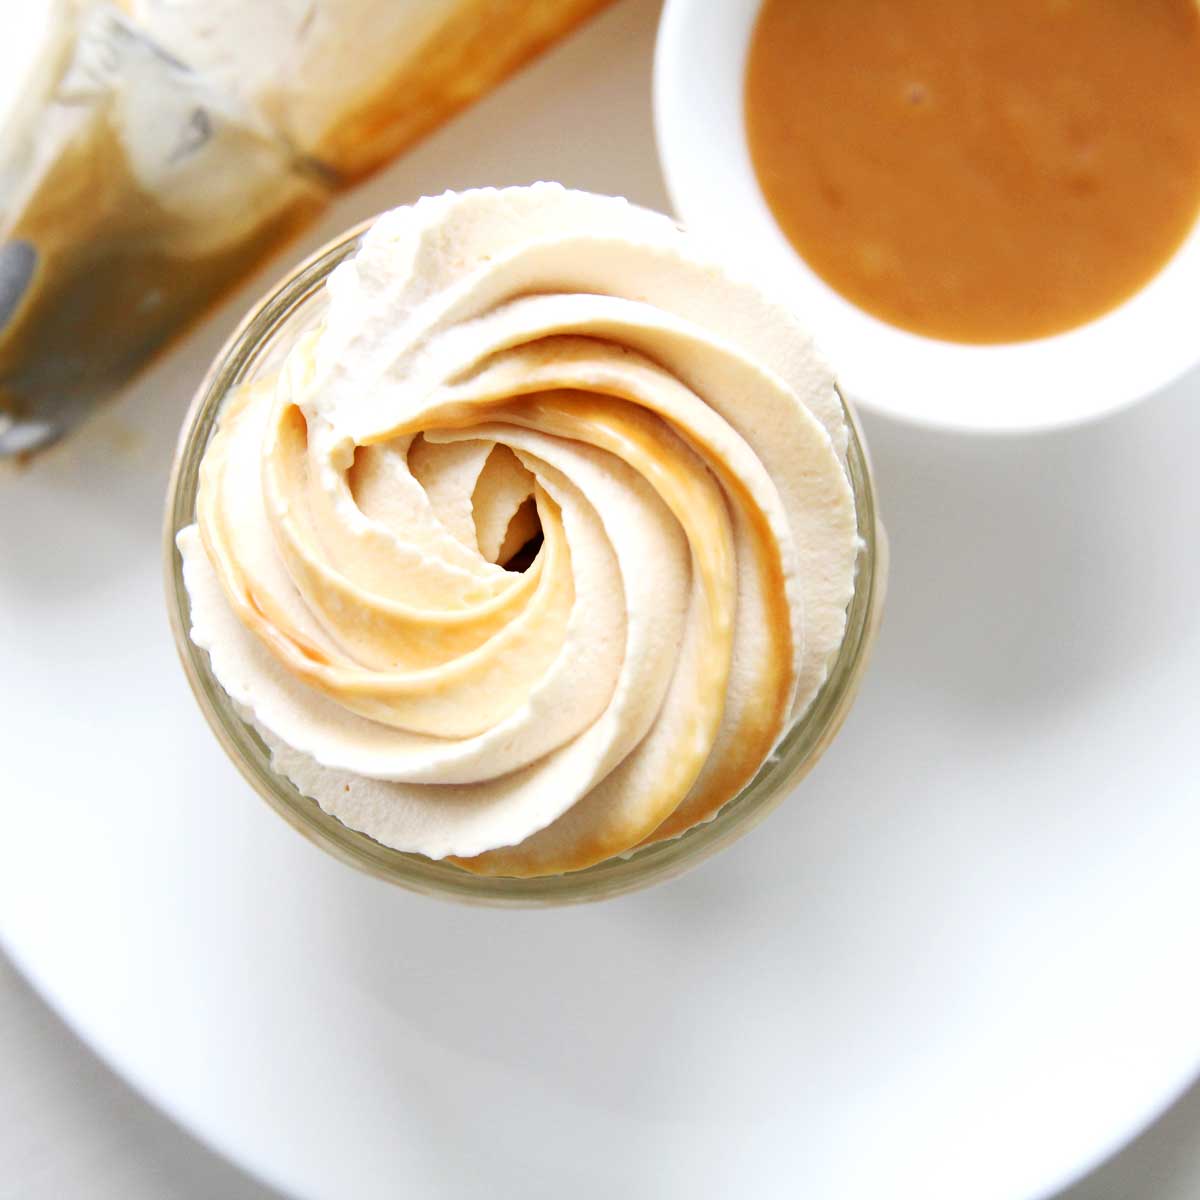 Rich Caramel Swirl Whipped Cream Recipe Perfect for Coffee, Cakes and More